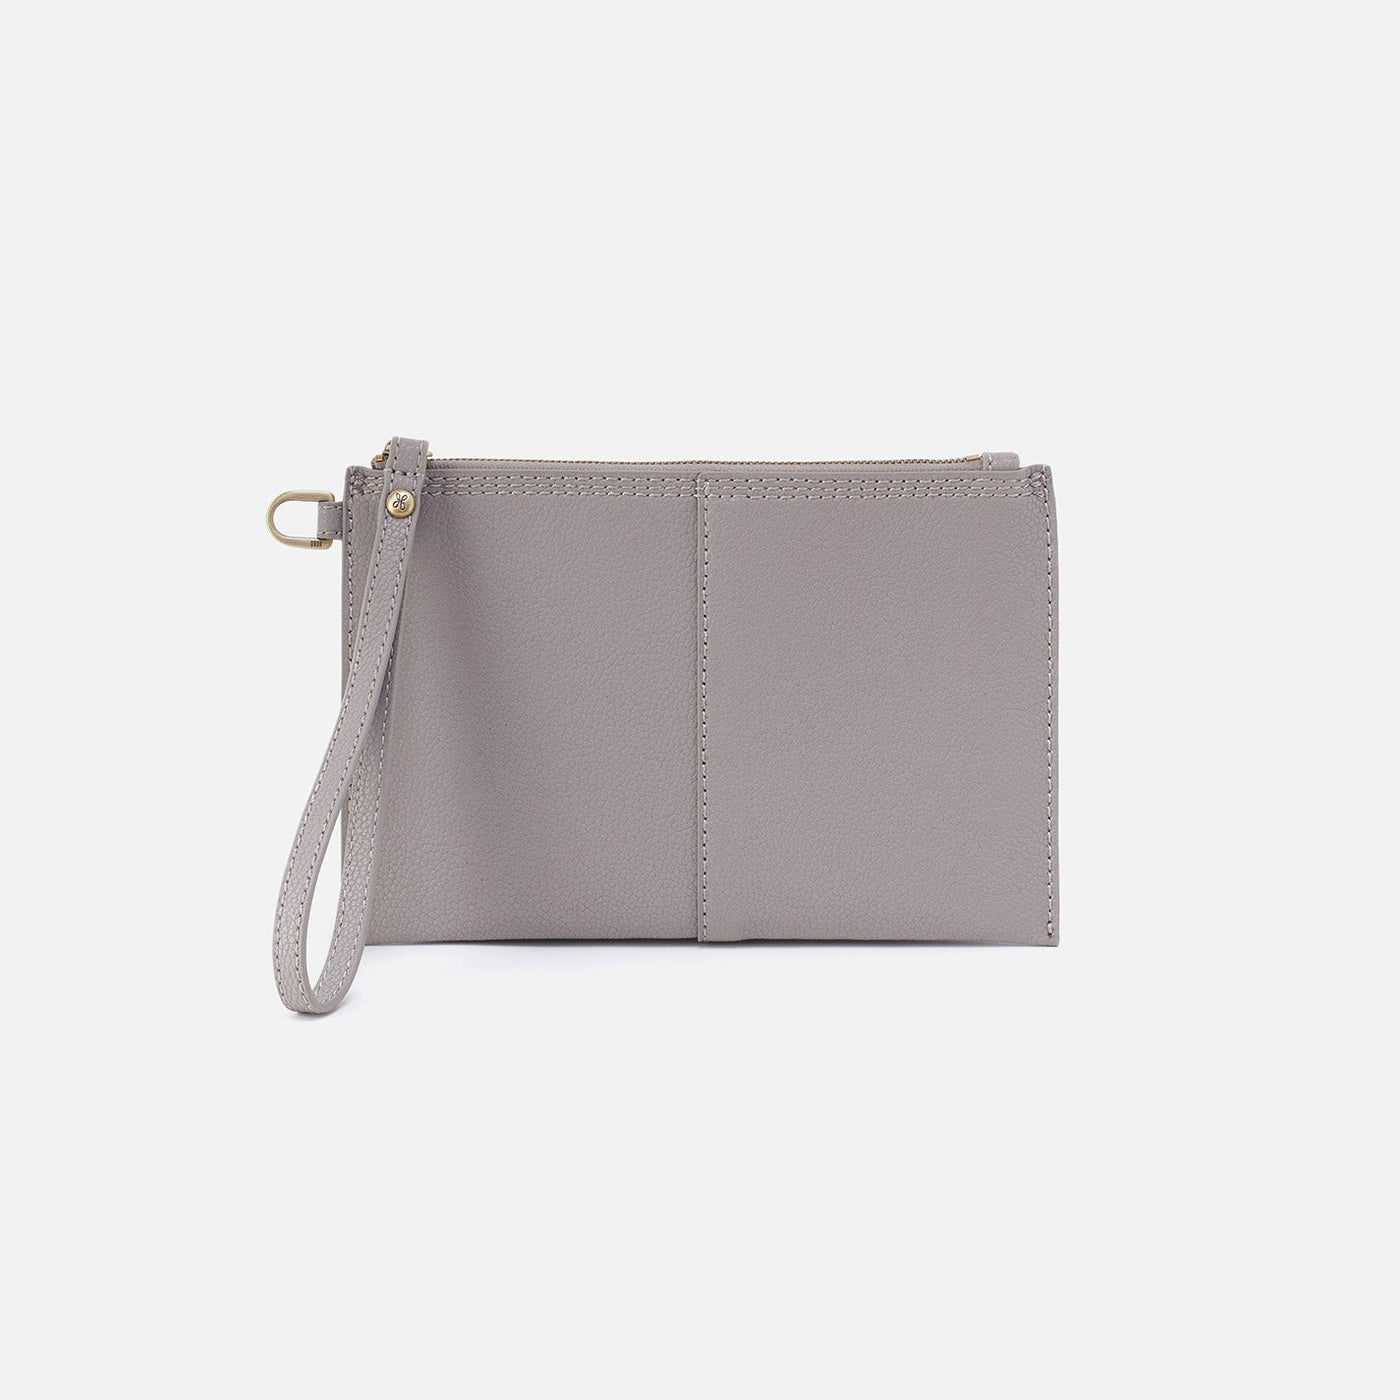 Vida Small Pouch in Micro Pebbled Leather - Morning Dove Grey – HOBO